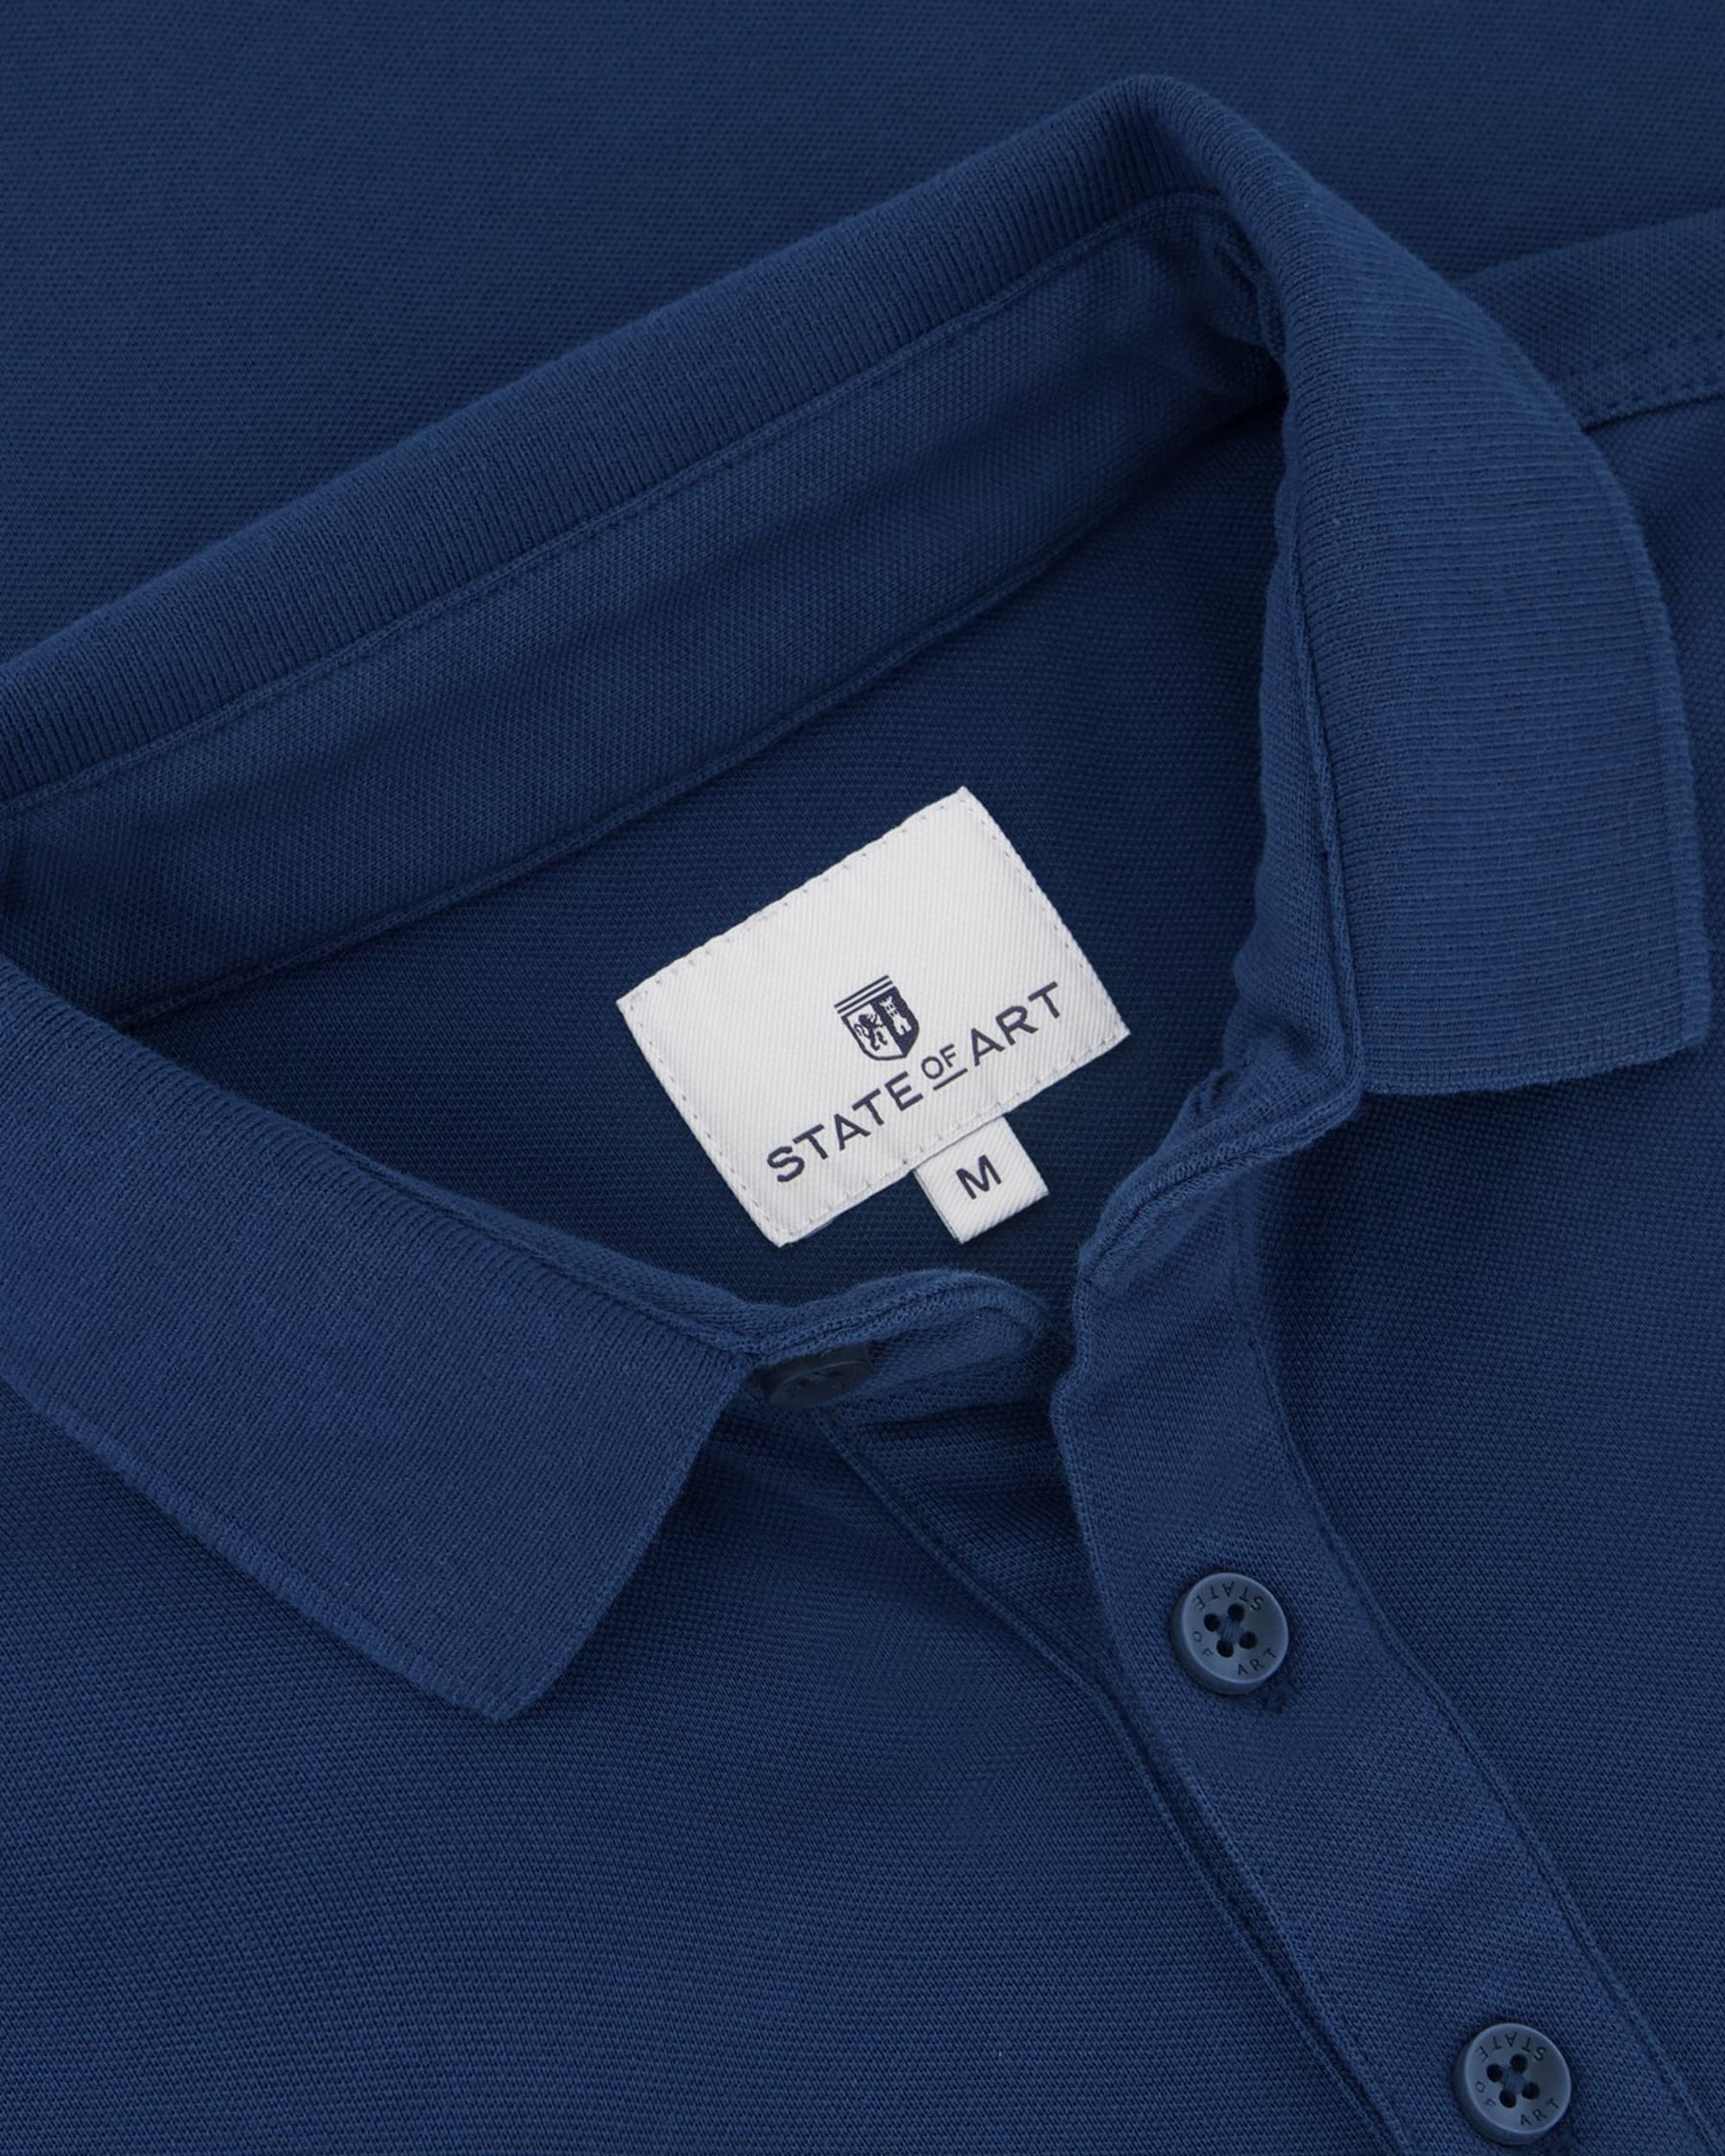 State of Art Polo KM Donker blauw 093443-002-4XL